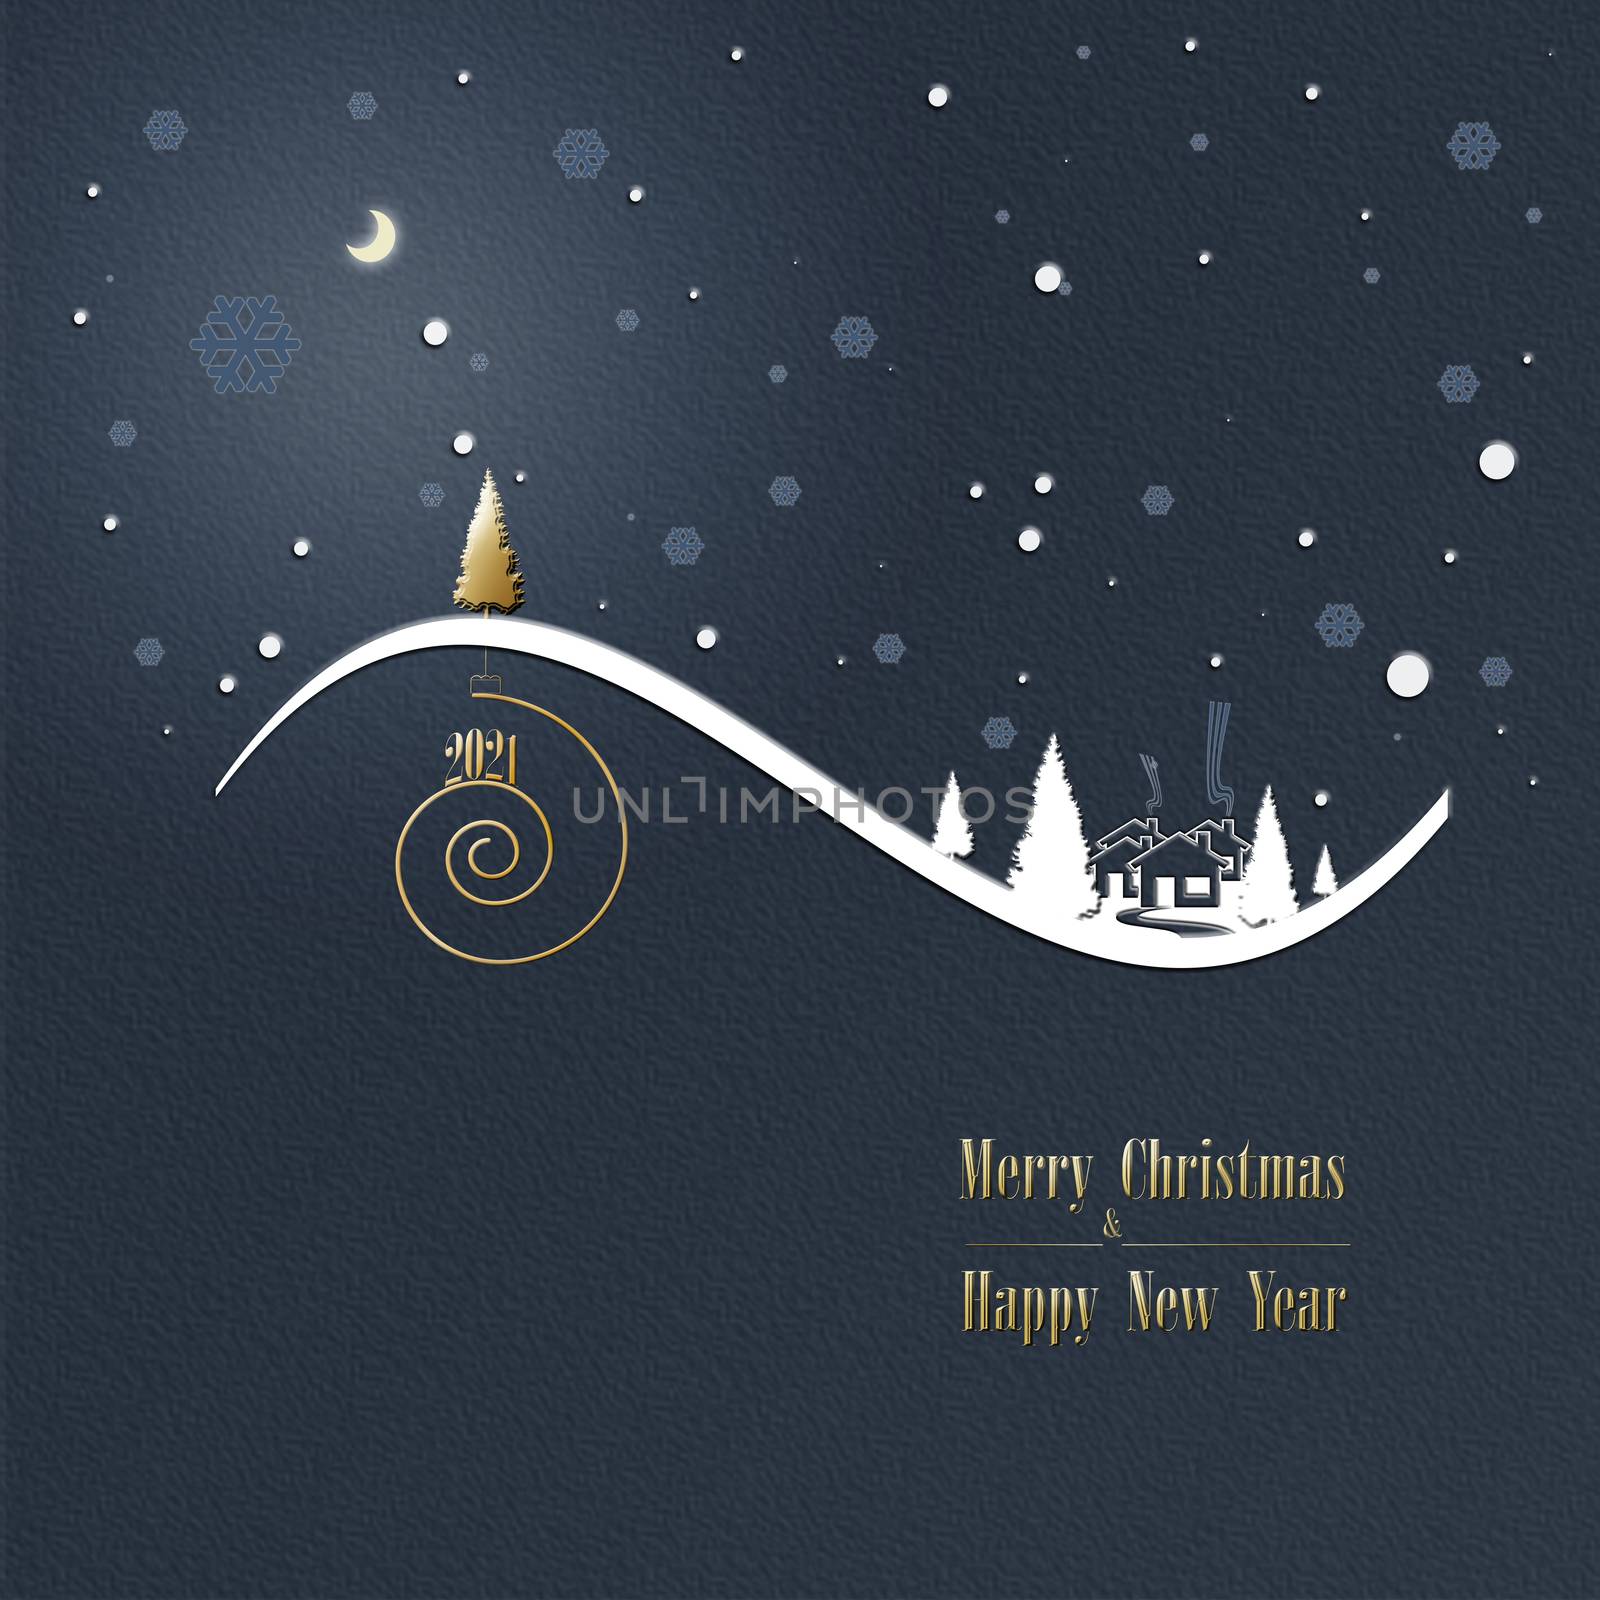 Beautiful stylish minimalist Christmas winter night landscape with snow, houses, moon, pine fir, shiny text 2021 on golden spiral and gold Christmas trees on dark blue background. Design, poster. 3D Illustration